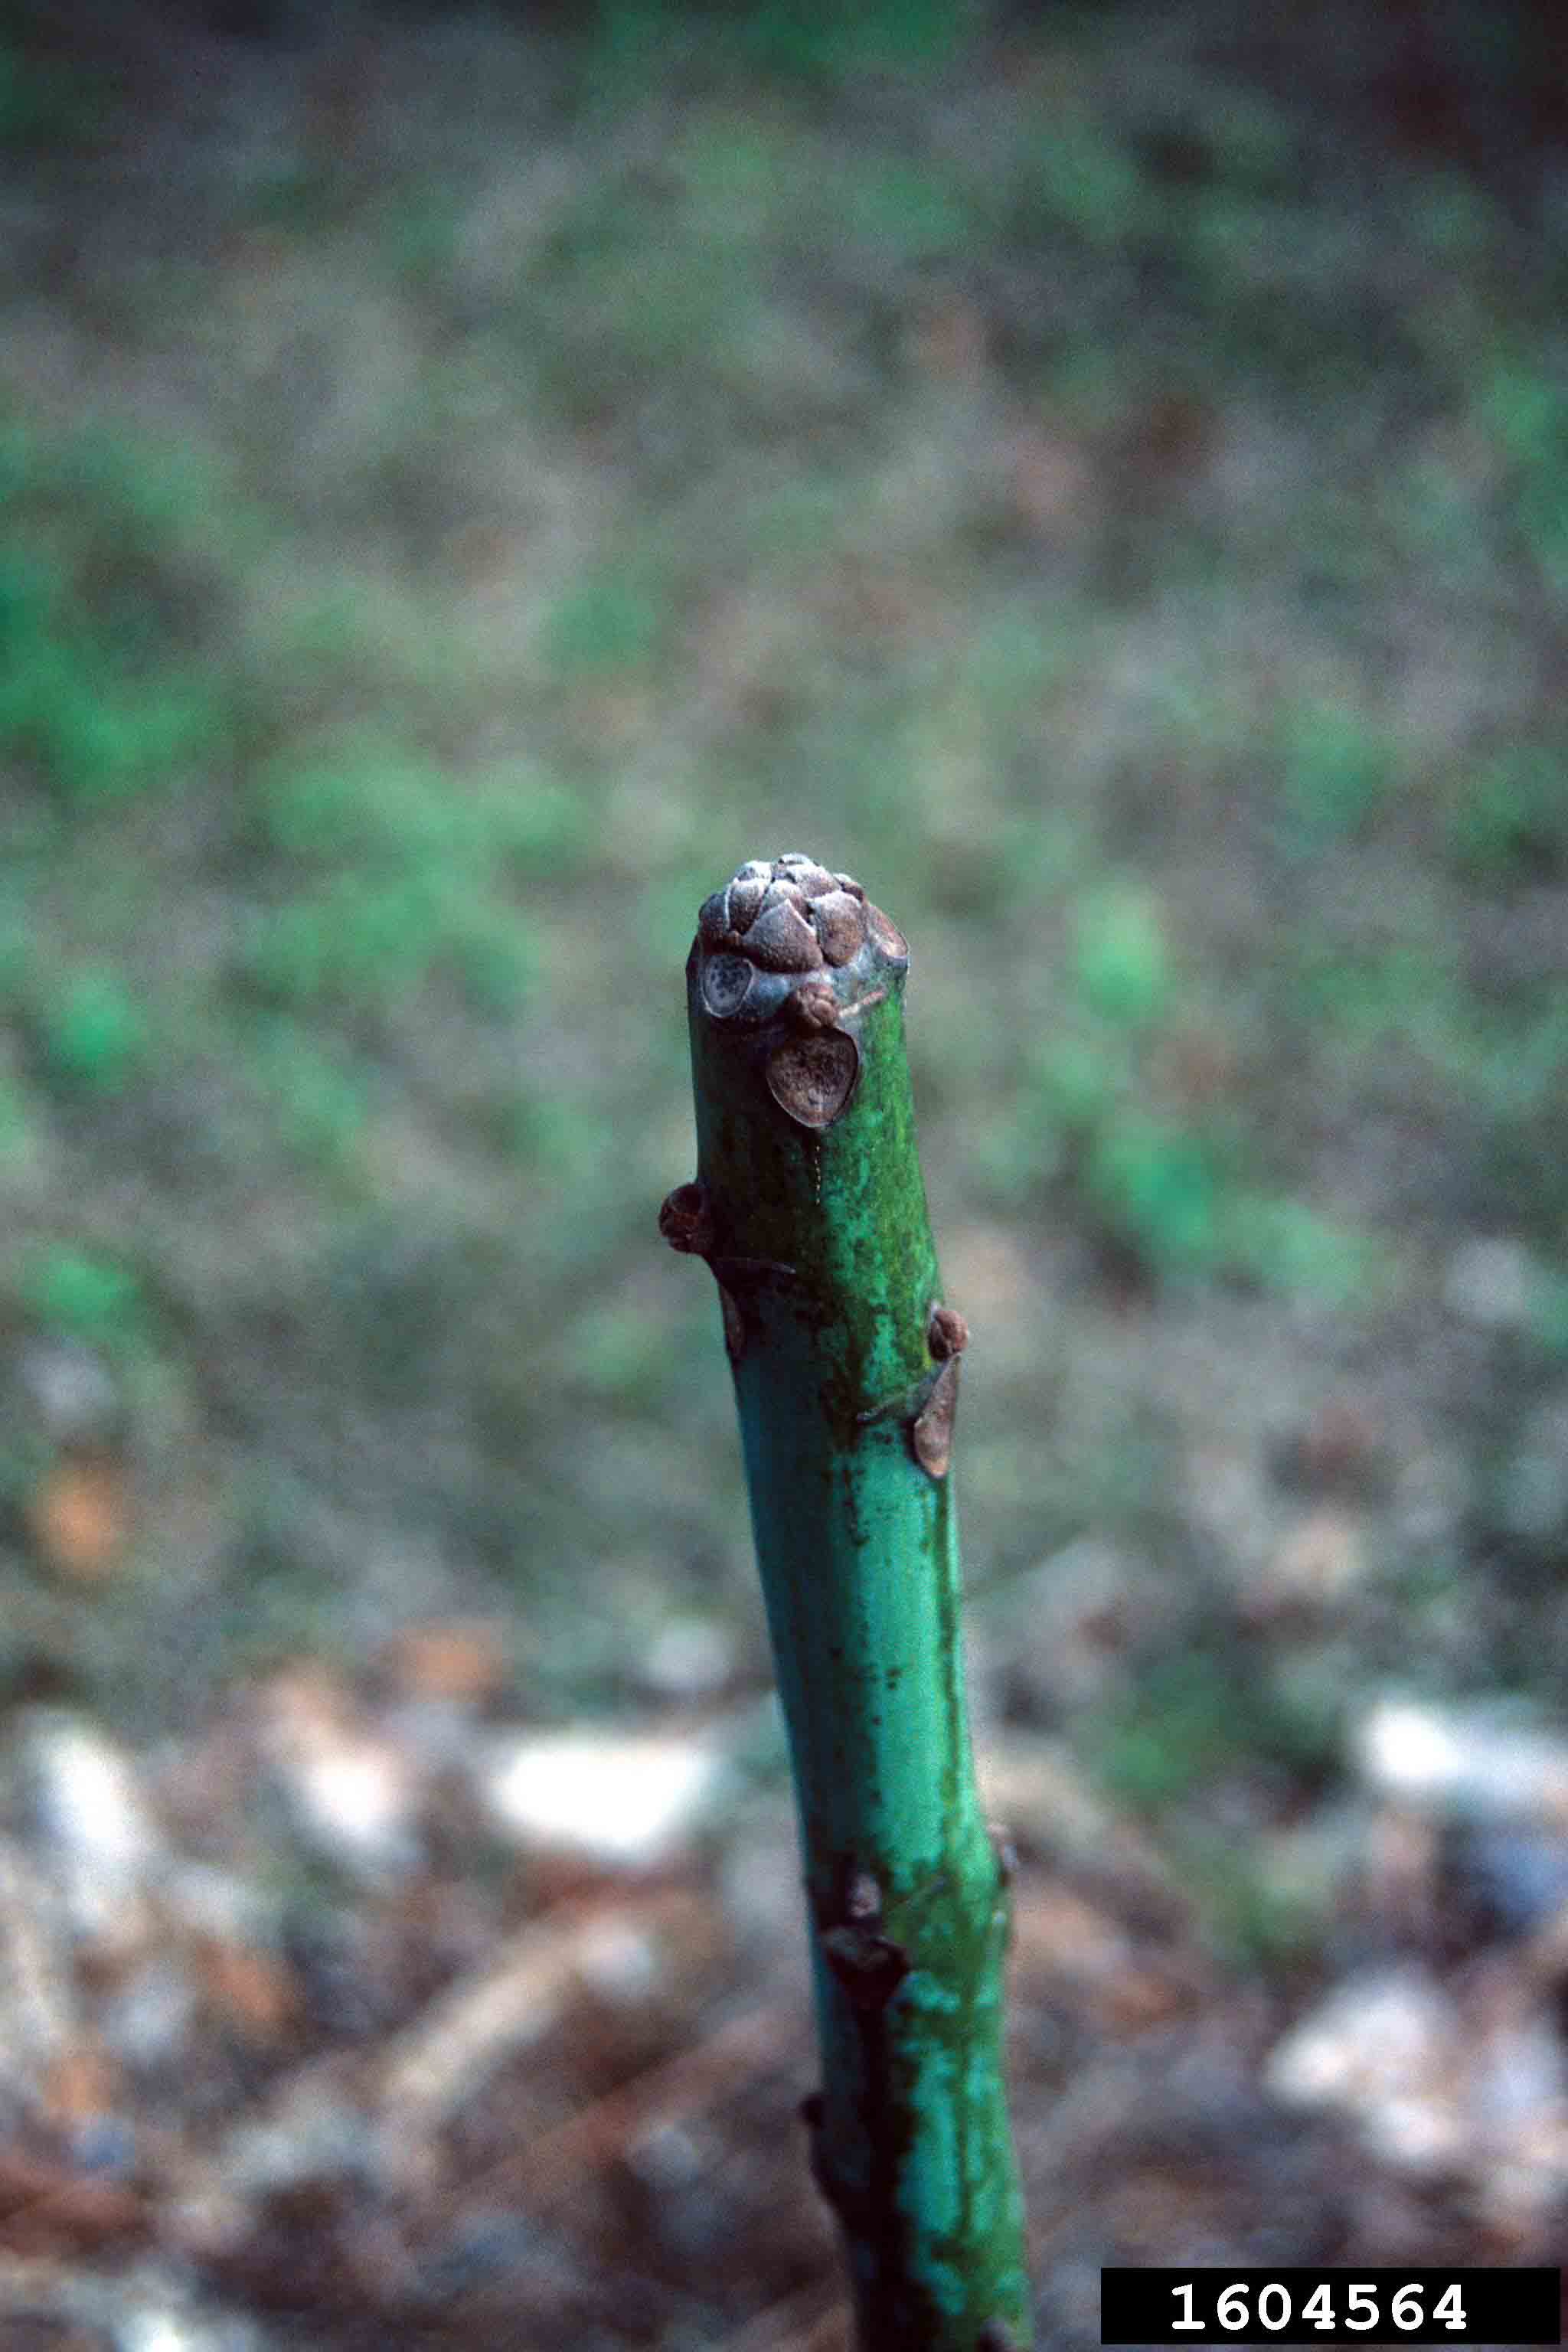 Chinese parasoltree twig, showing bud and leaf scars